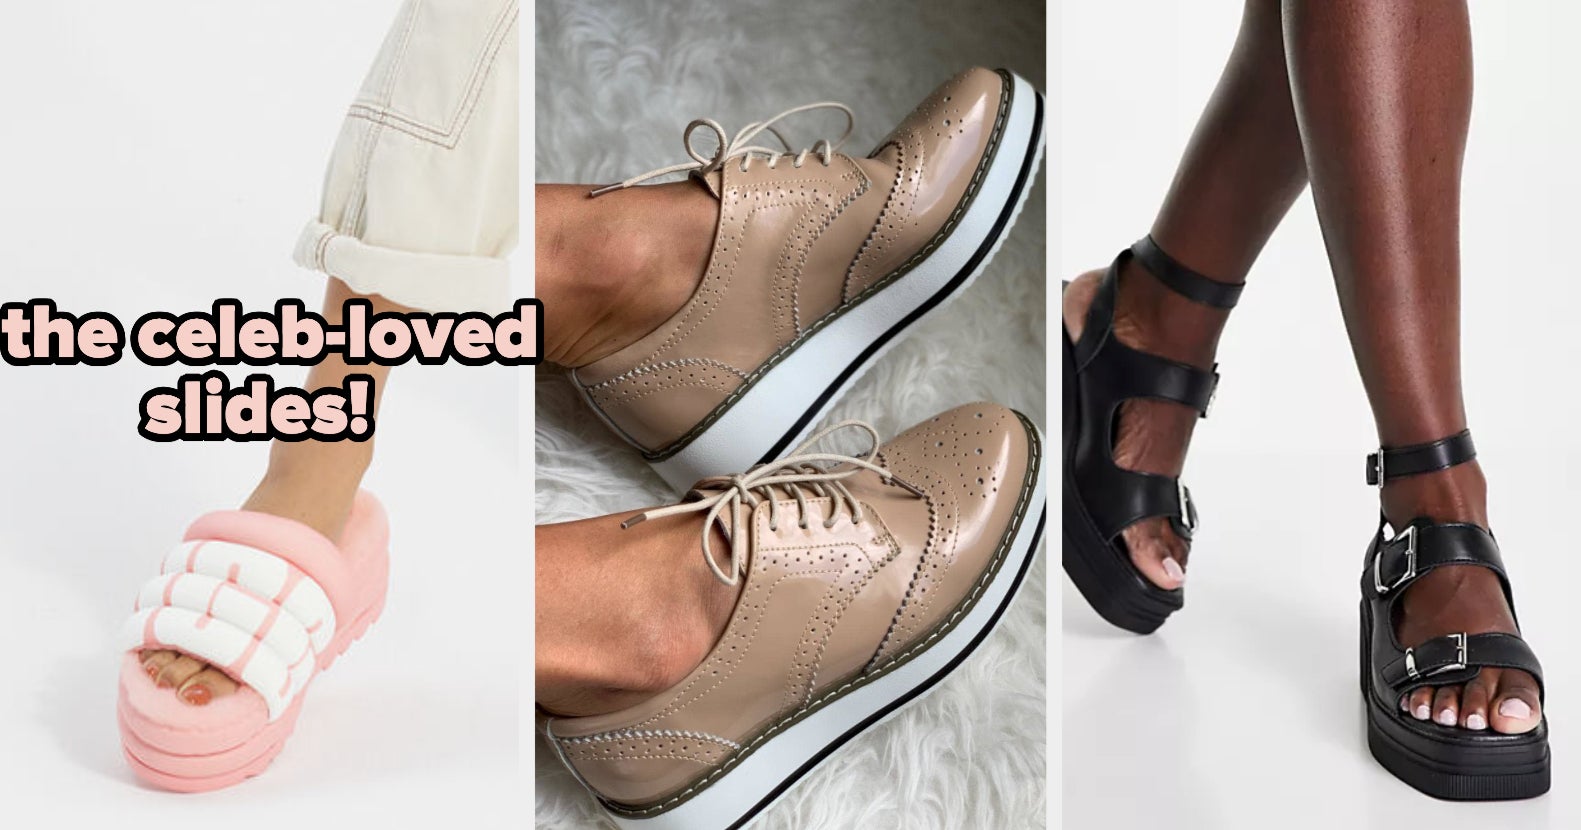 Premium Photo  Closeup of female legs in black jeans in stylish leather  beige shoes fashionable woman in new loafers modern seasonal collection of  stylish shoes womens fashion